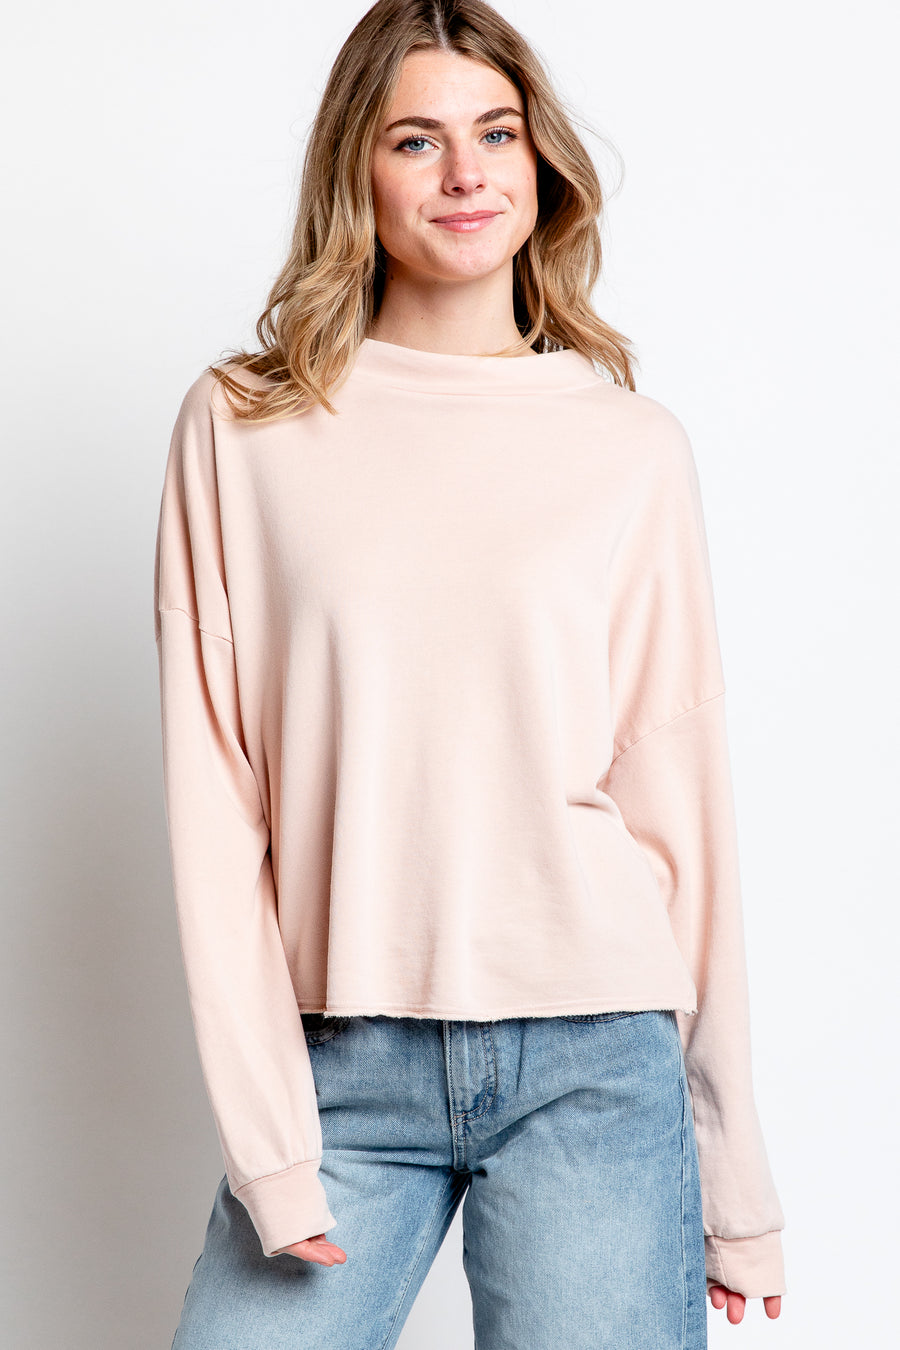 Lanston Cuffed Neck Pullover in Base